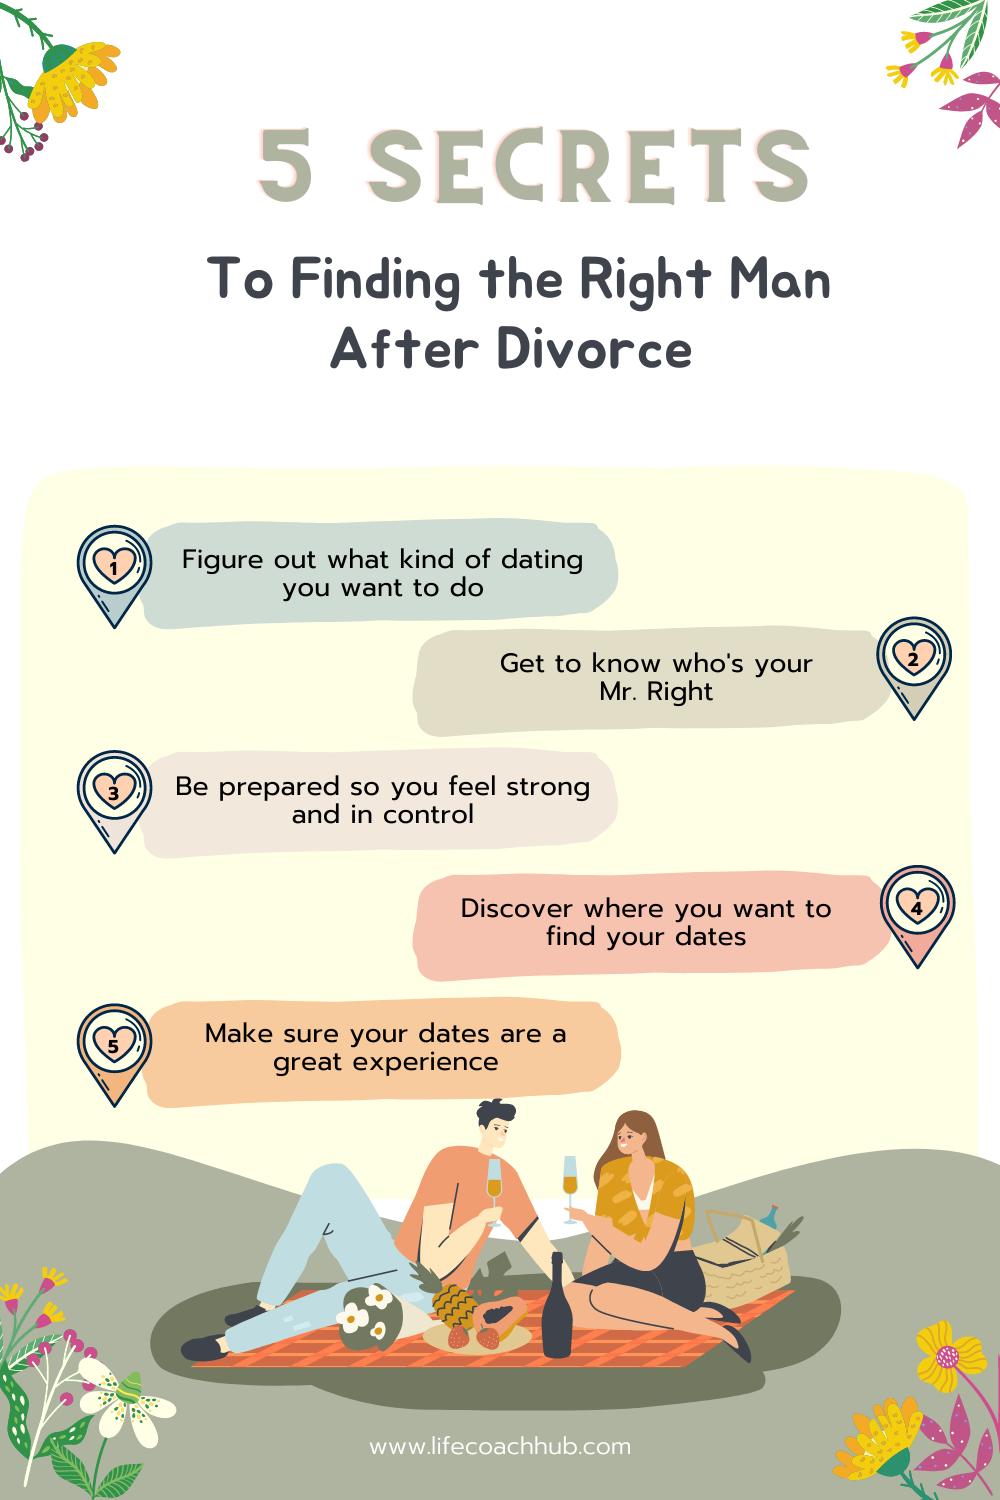 5 Secrets to Finding the Right Man After Divorce